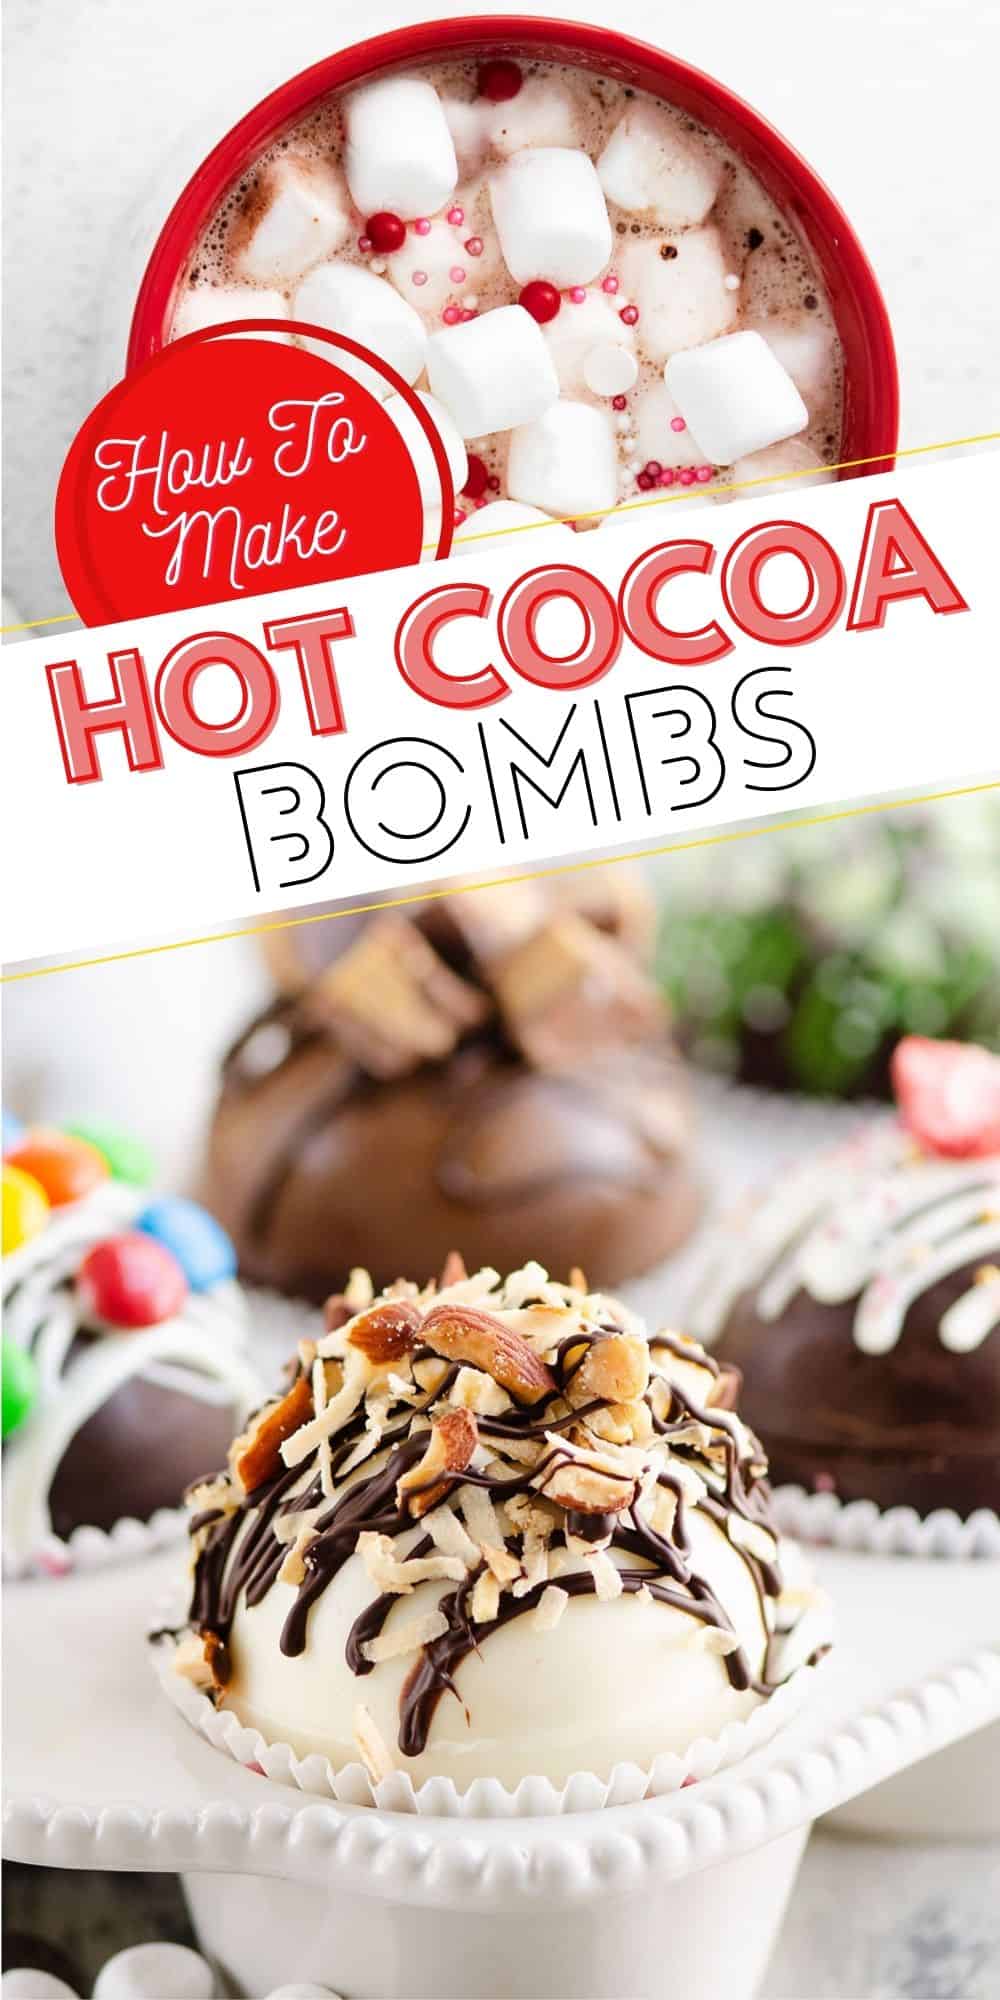 How to Make Hot Cocoa Bombs